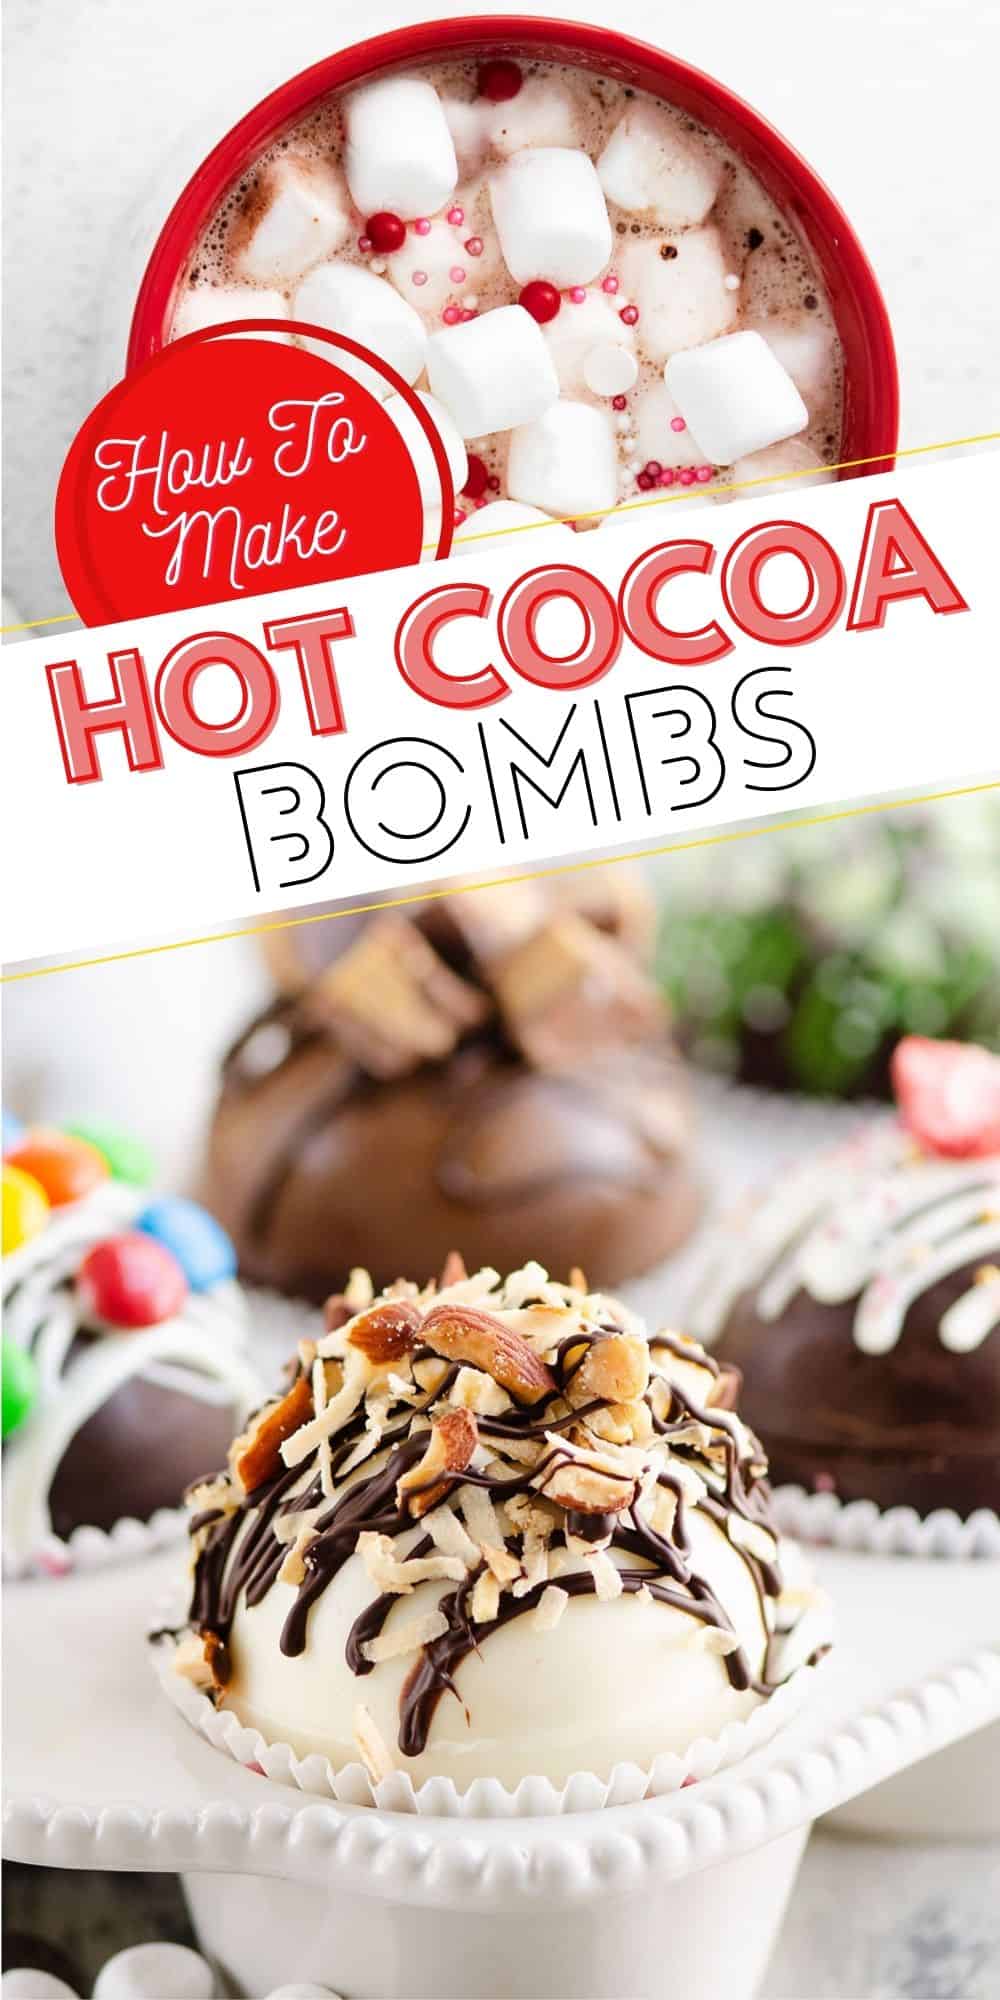 How to Make Hot Cocoa Bombs